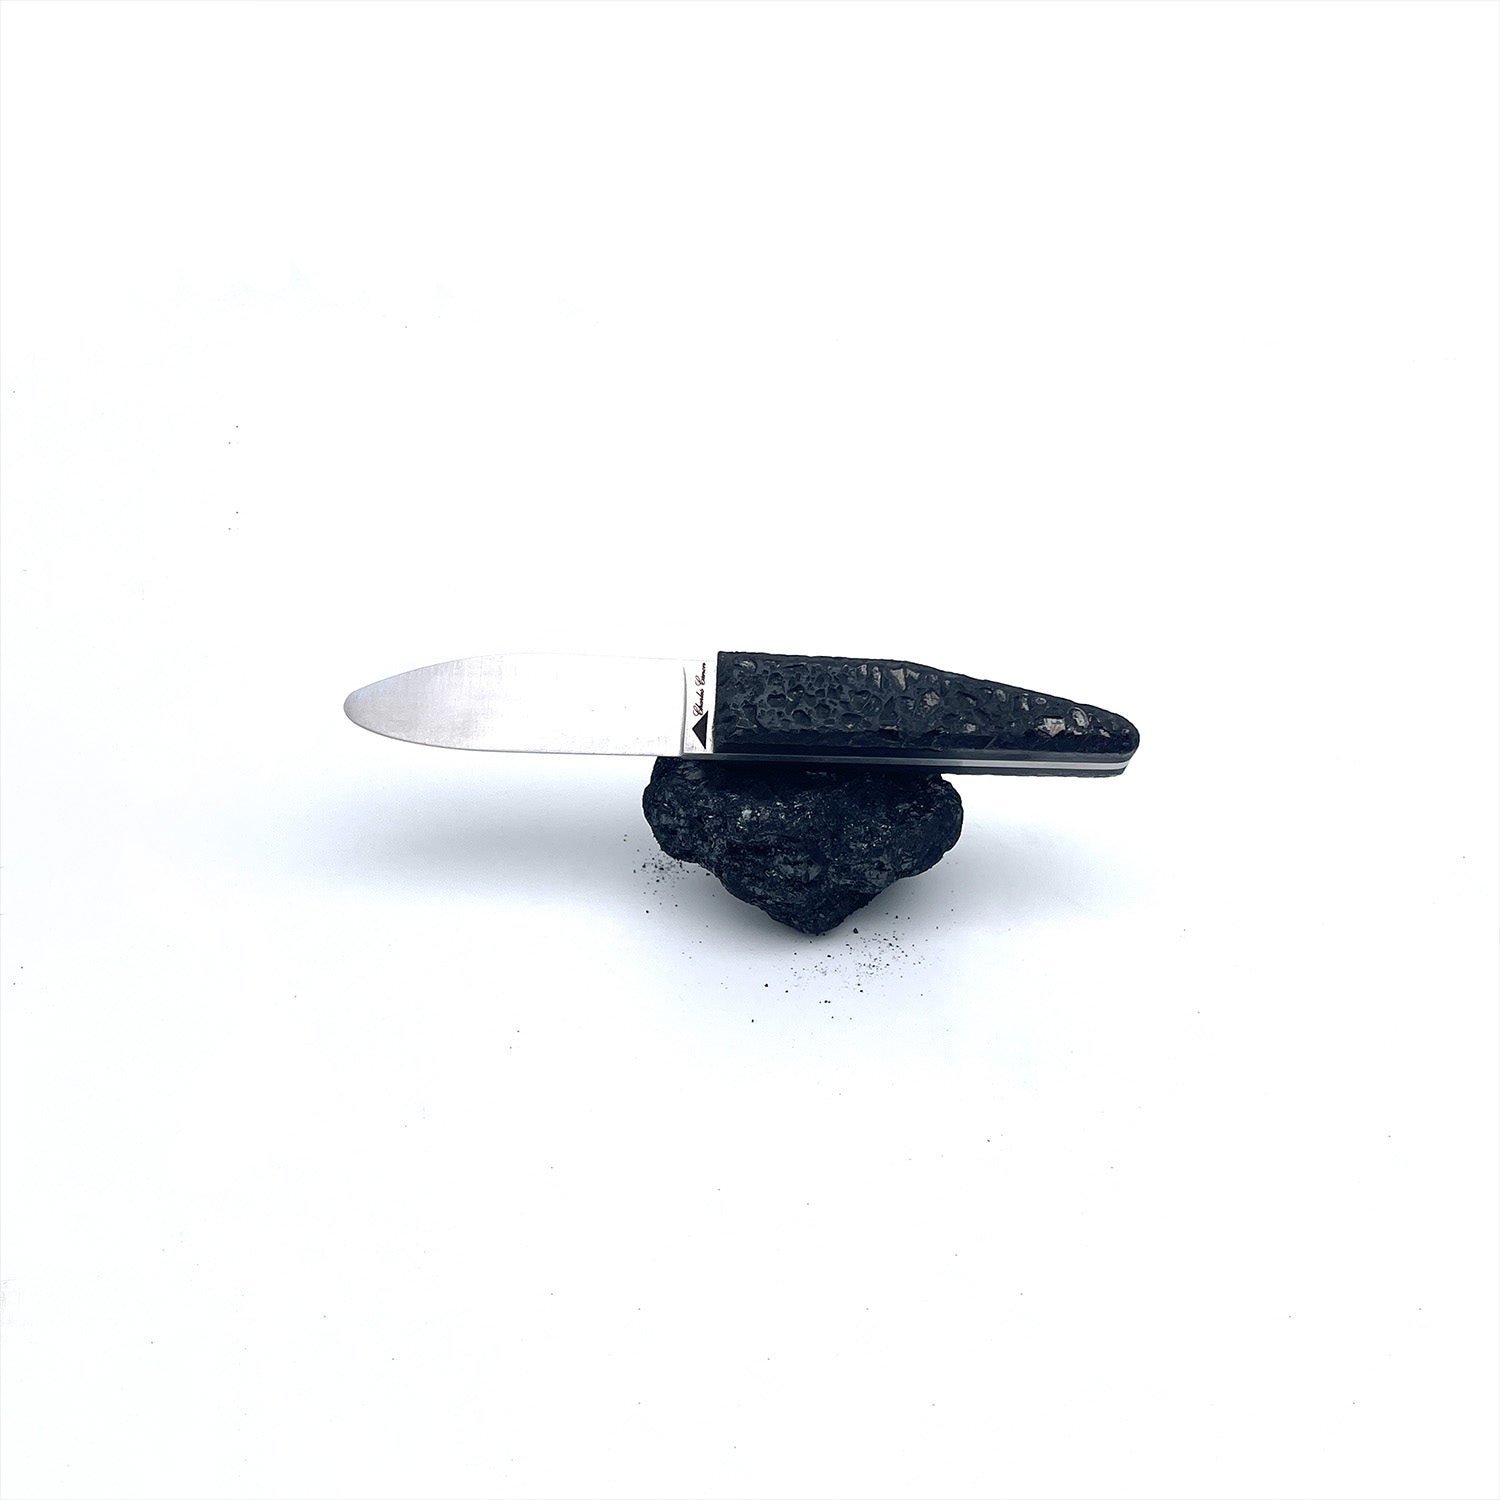 Children's knife with a raw charcoal handle